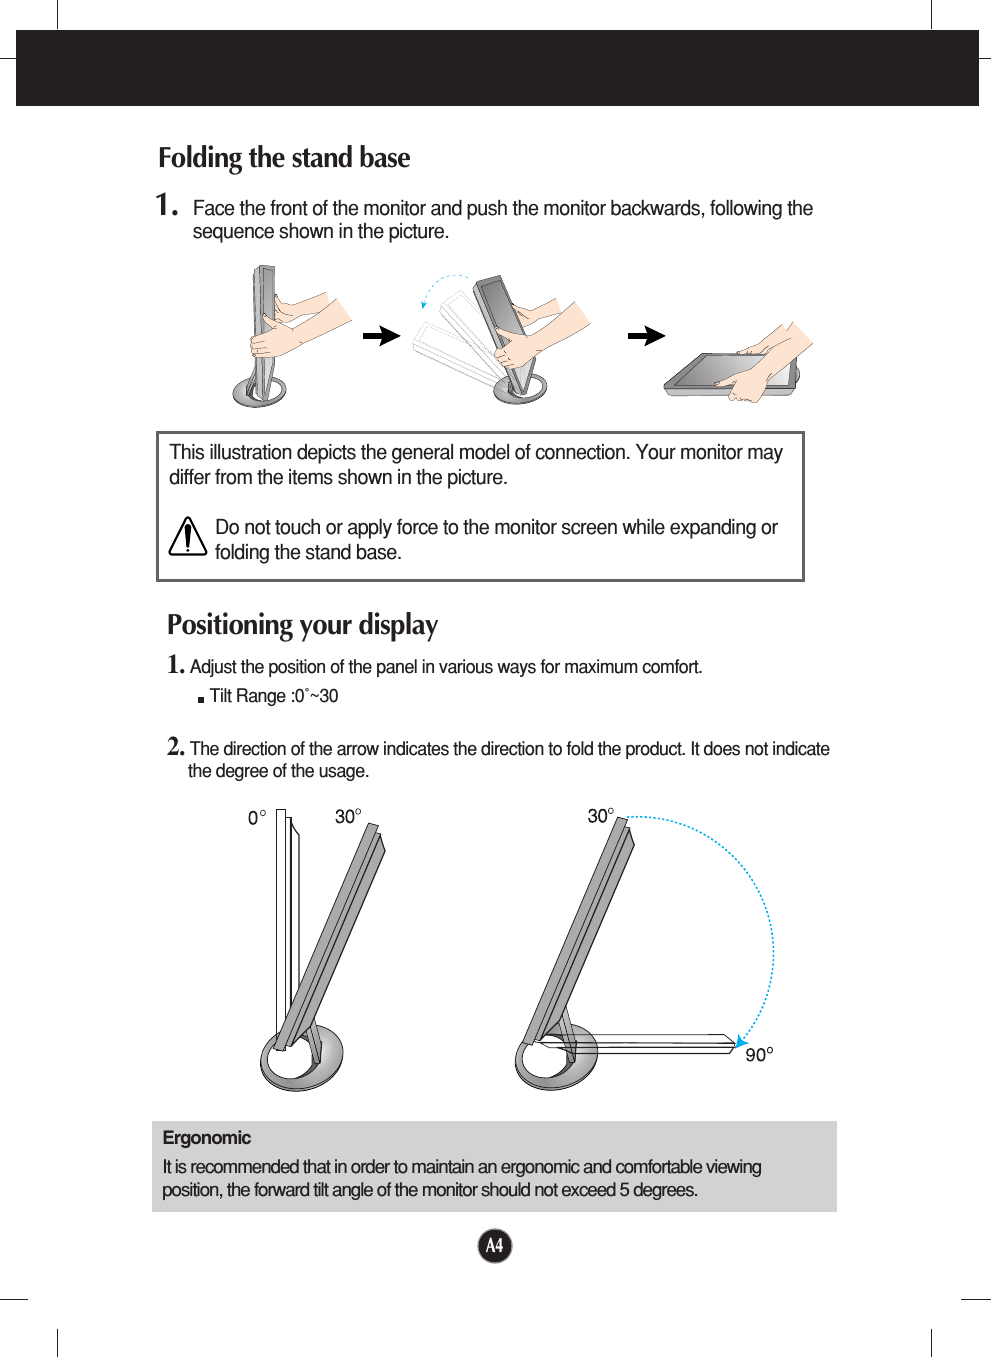 A41. Face the front of the monitor and push the monitor backwards, following thesequence shown in the picture. Folding the stand baseThis illustration depicts the general model of connection. Your monitor maydiffer from the items shown in the picture.Do not touch or apply force to the monitor screen while expanding orfolding the stand base.Positioning your display1. Adjust the position of the panel in various ways for maximum comfort.Tilt Range :0˚~30     2. The direction of the arrow indicates the direction to fold the product. It does not indicatethe degree of the usage.ErgonomicIt is recommended that in order to maintain an ergonomic and comfortable viewingposition, the forward tilt angle of the monitor should not exceed 5 degrees.